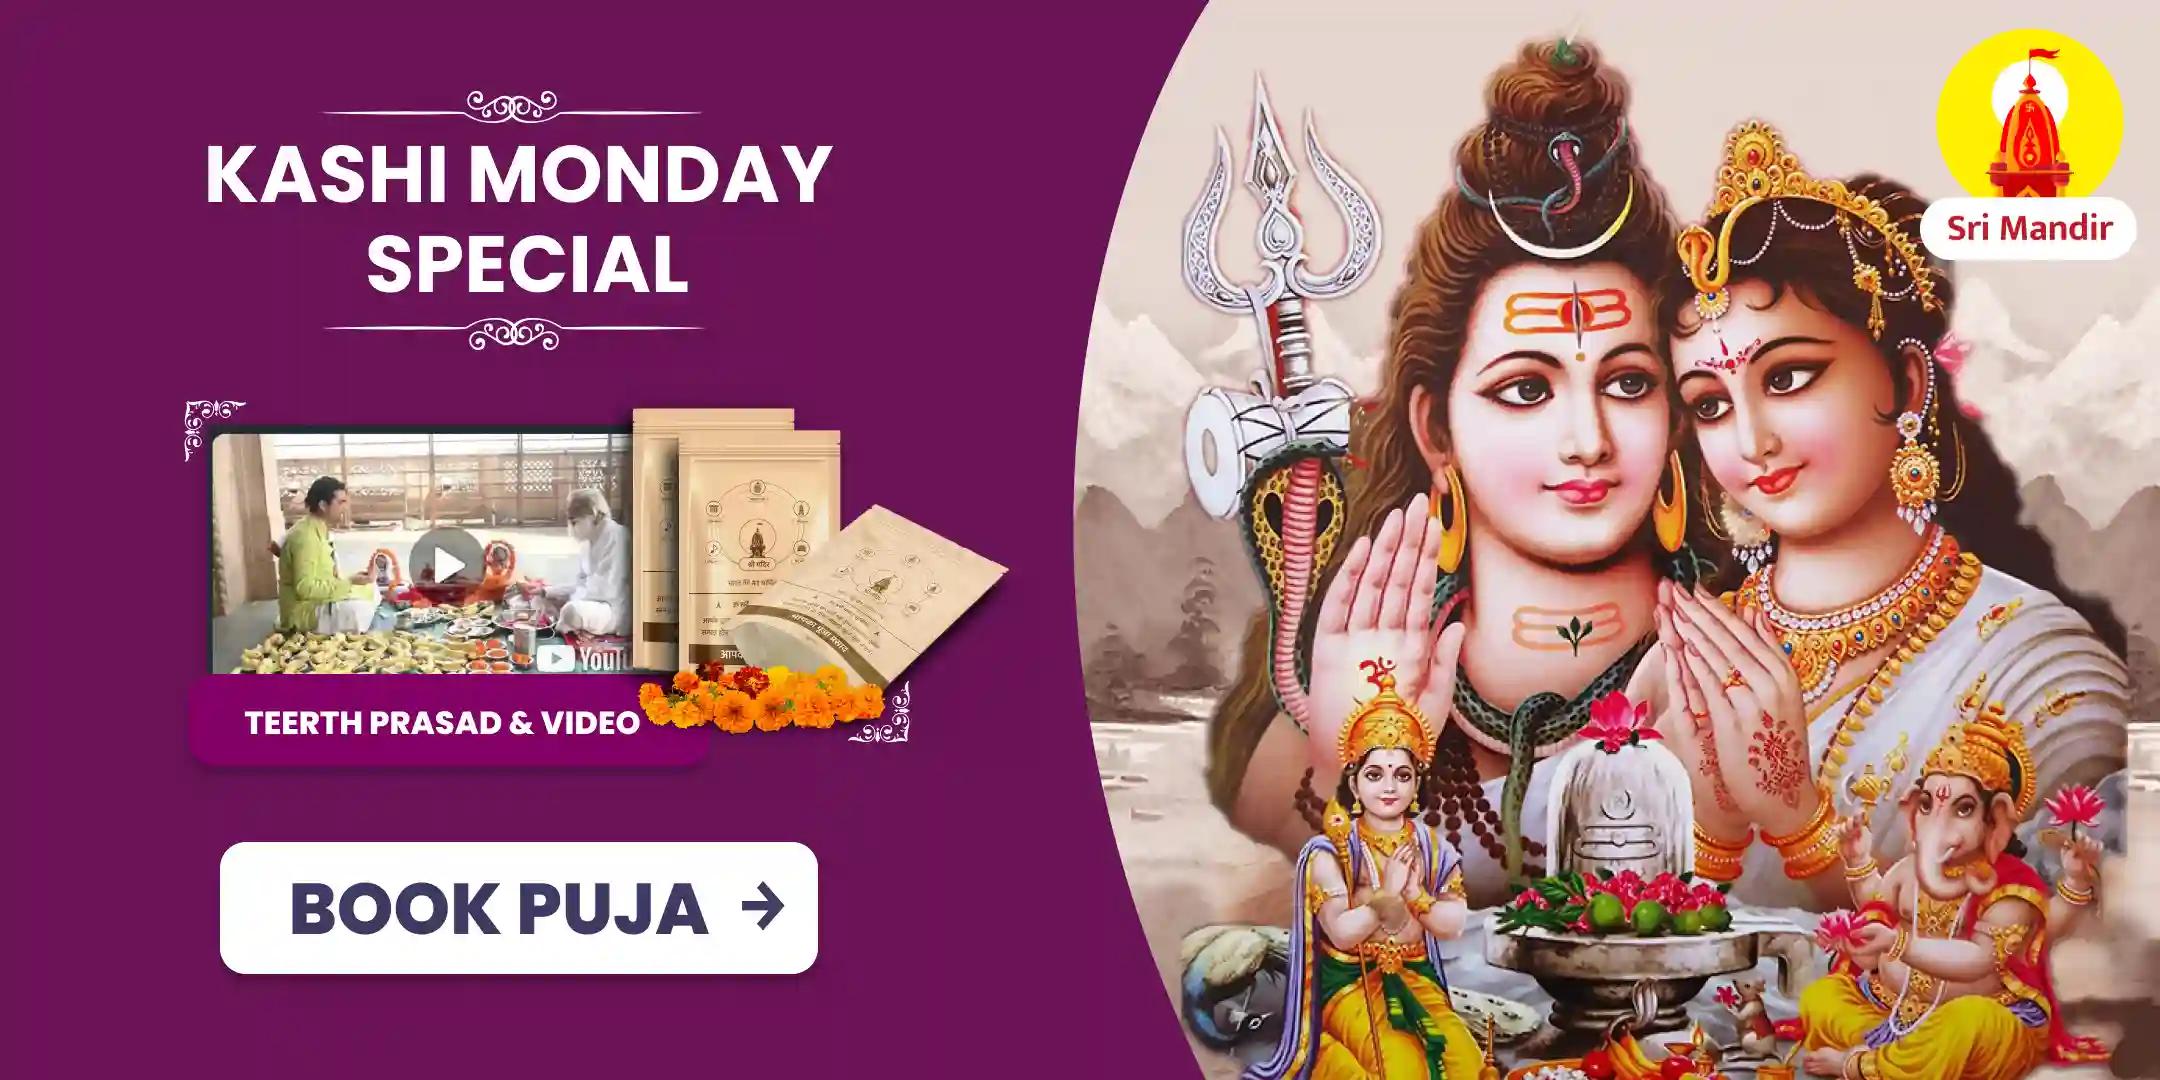 Kashi Monday Special Gauri-Shankar Puja and Shiv-Gauri Stotra Path To Resolve Conflicts and Achieve Bliss in Relationship 